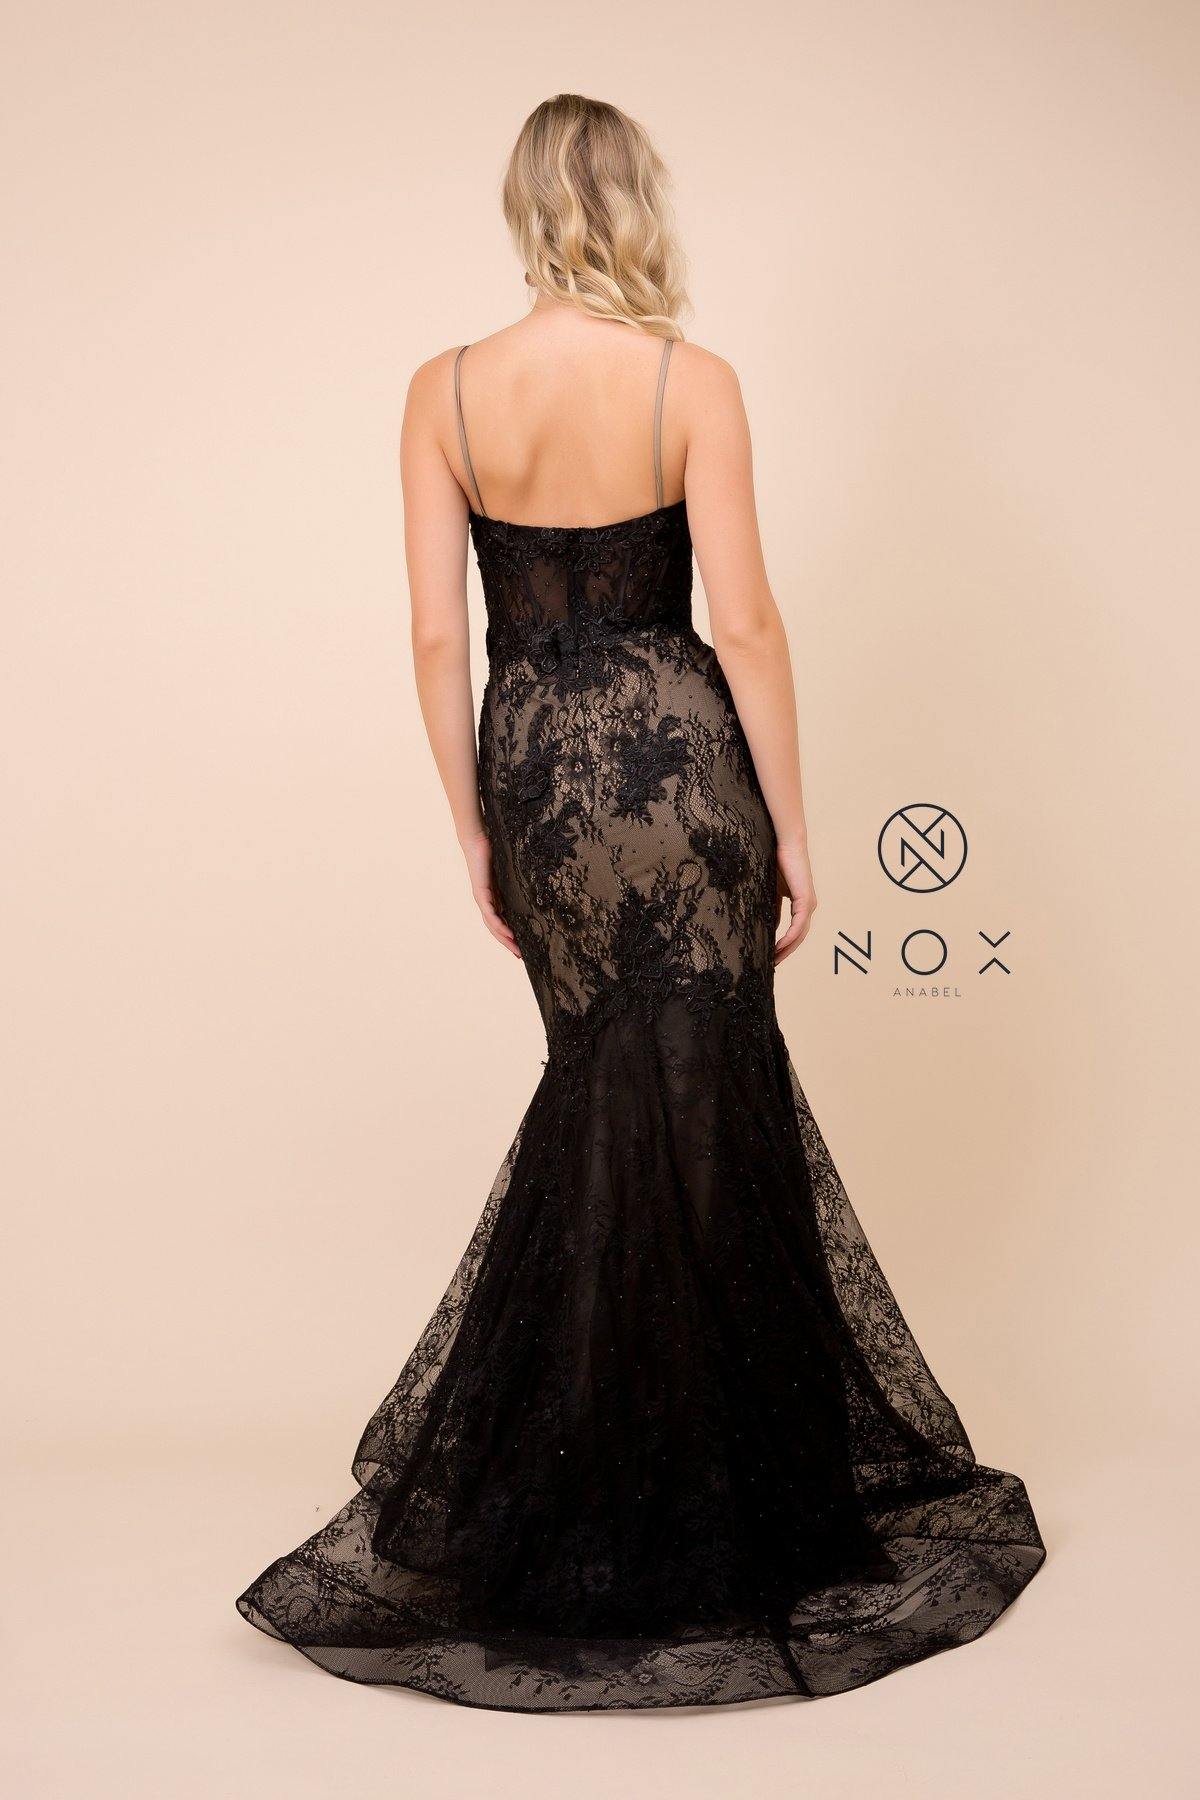 Long Formal Spaghetti Strap Mermaid Prom Lace Gown - The Dress Outlet Nox Anabel